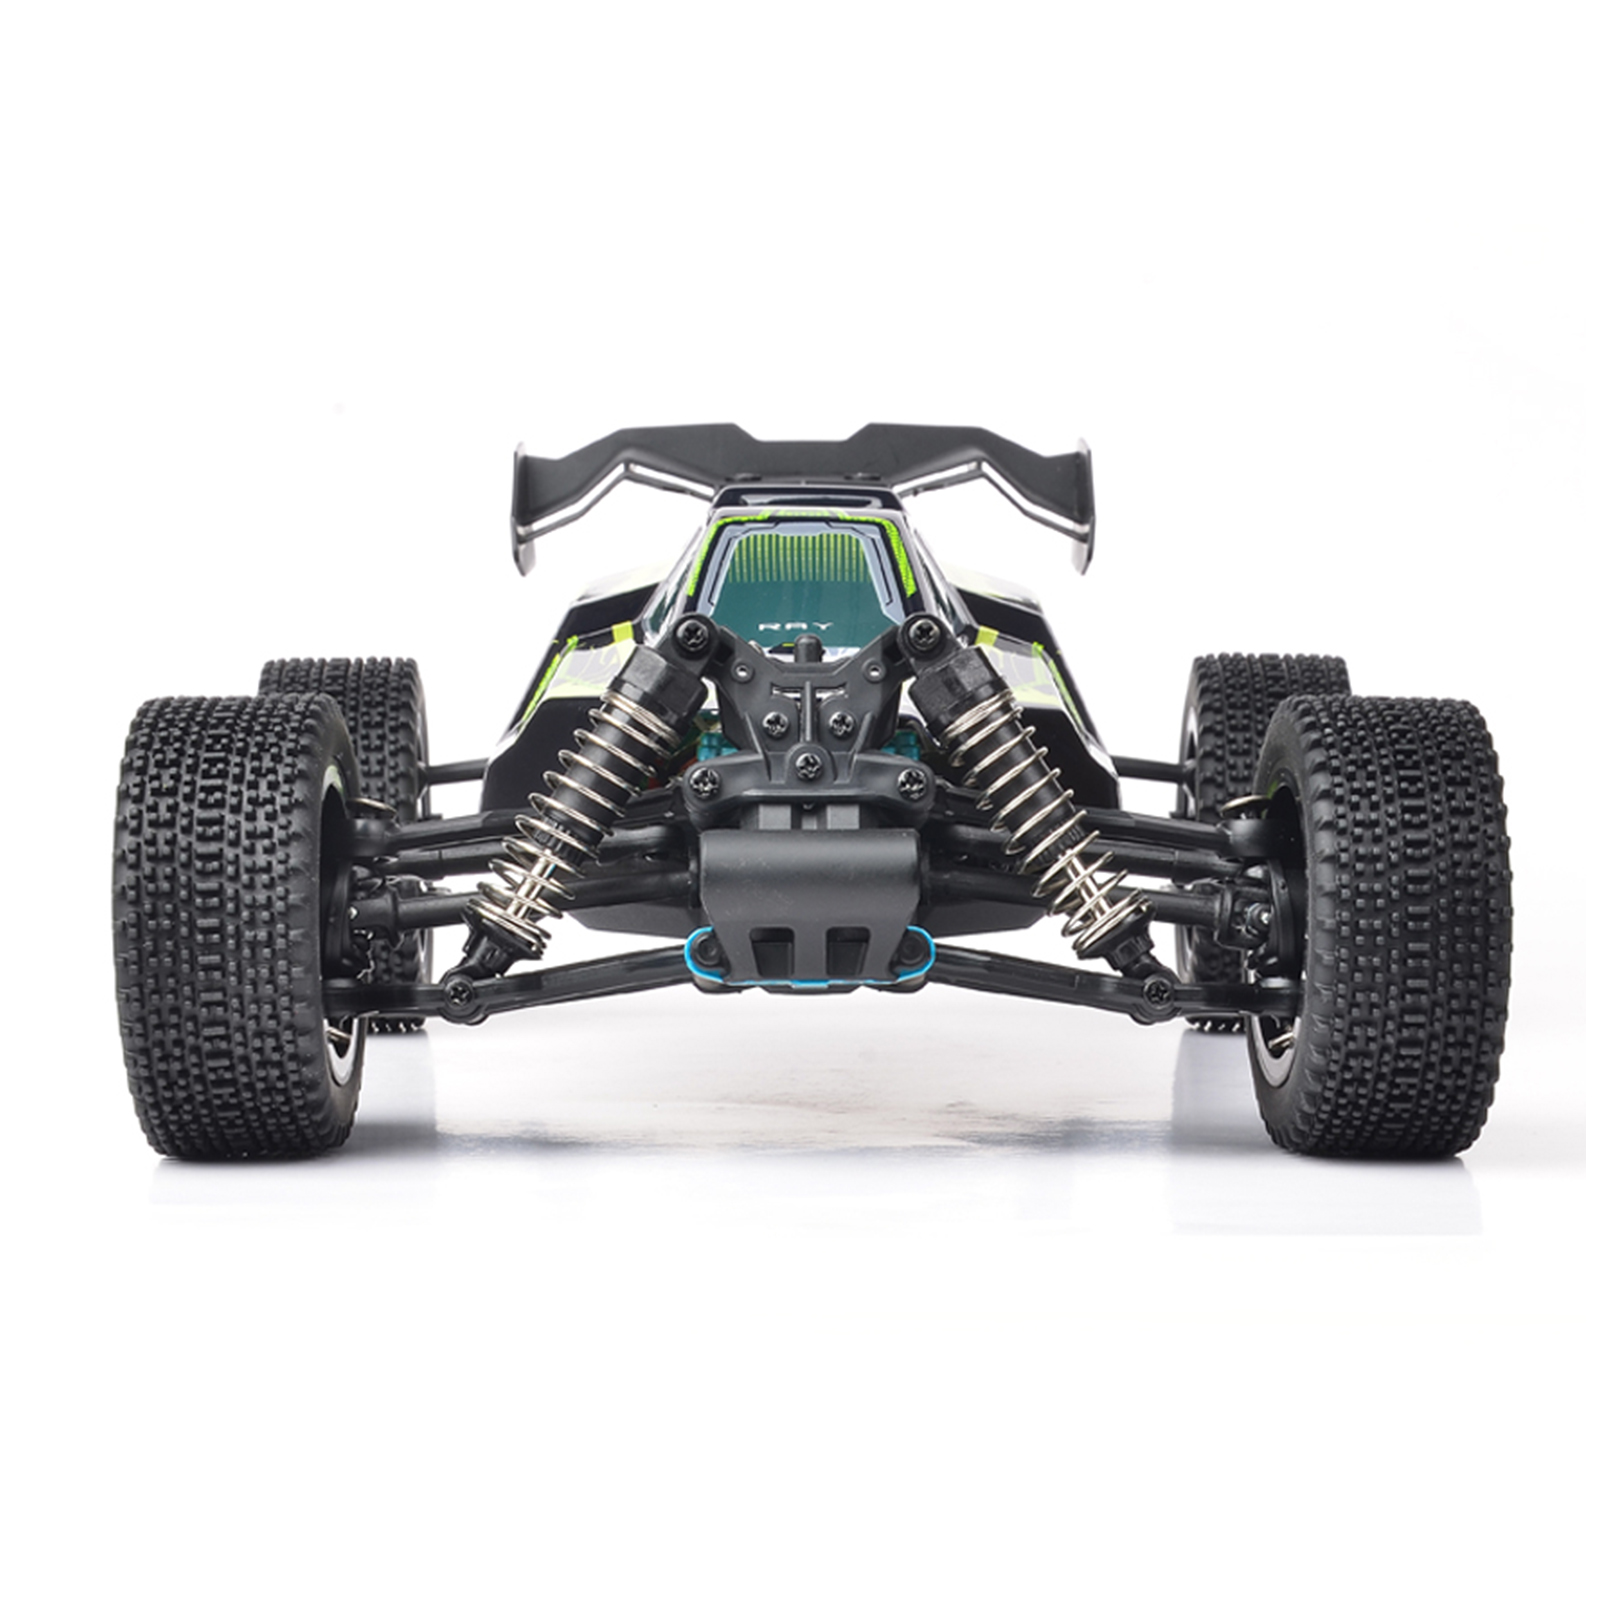 Off-Road Car  Truck  Car High Speed 35kmh 116 2.4GHz Racing Car 4WD  for Boys with 2 Battery - image 3 of 7